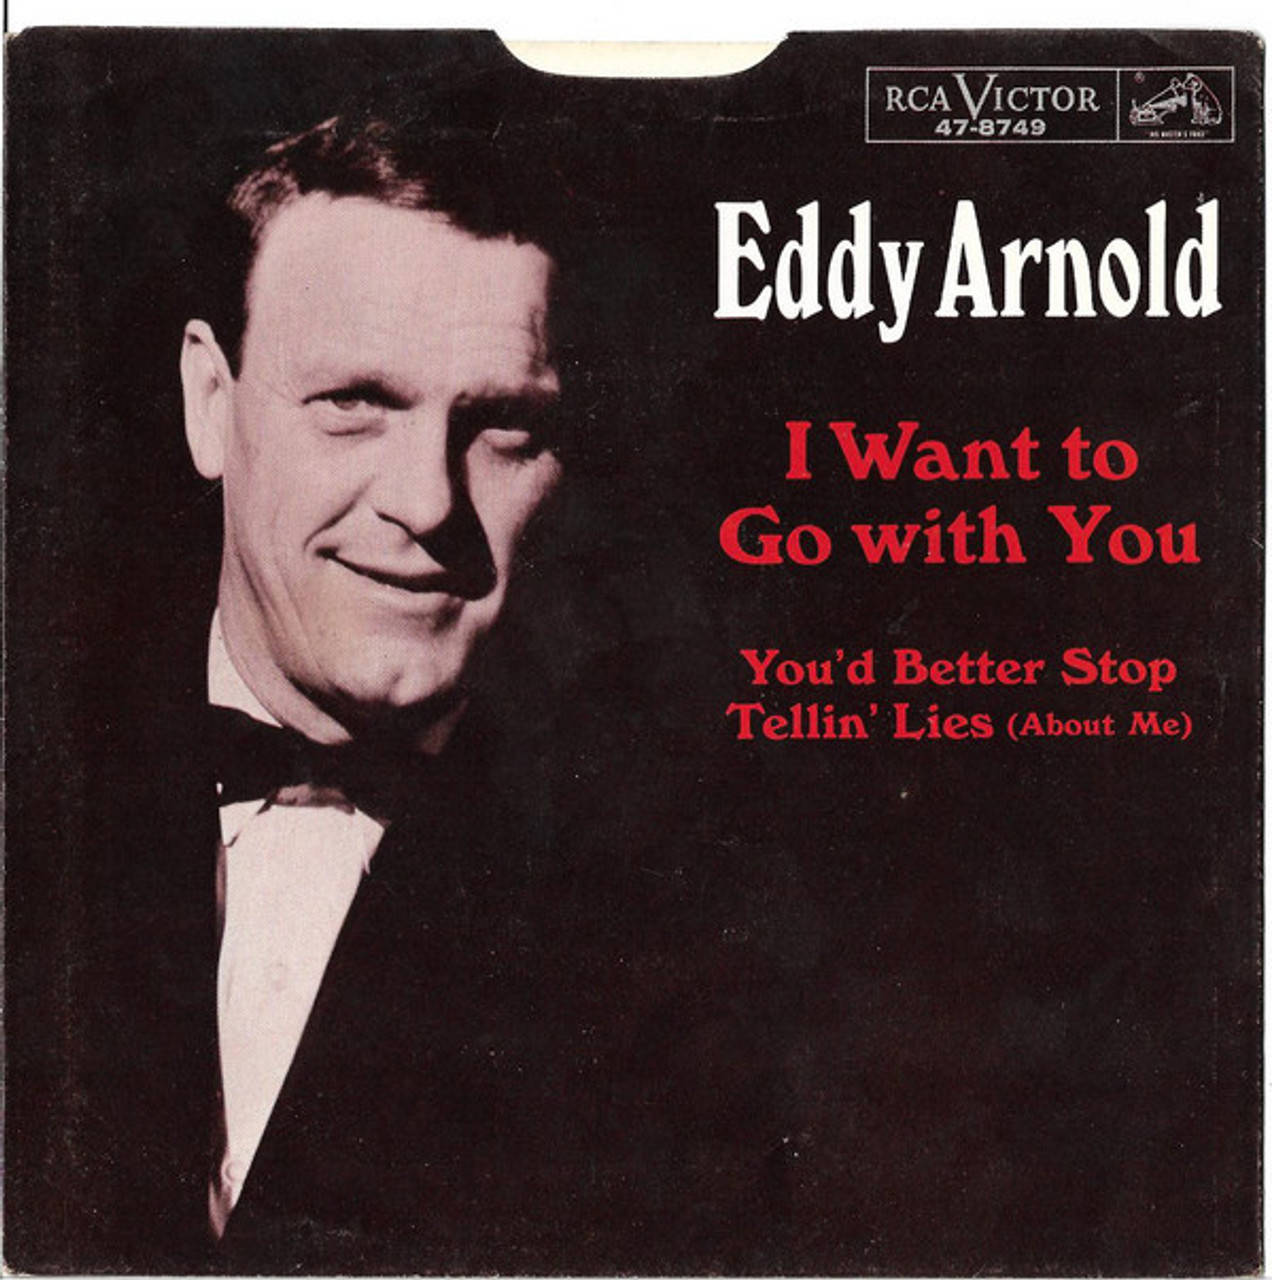 Eddy Arnold expressing emotions through his music Wallpaper